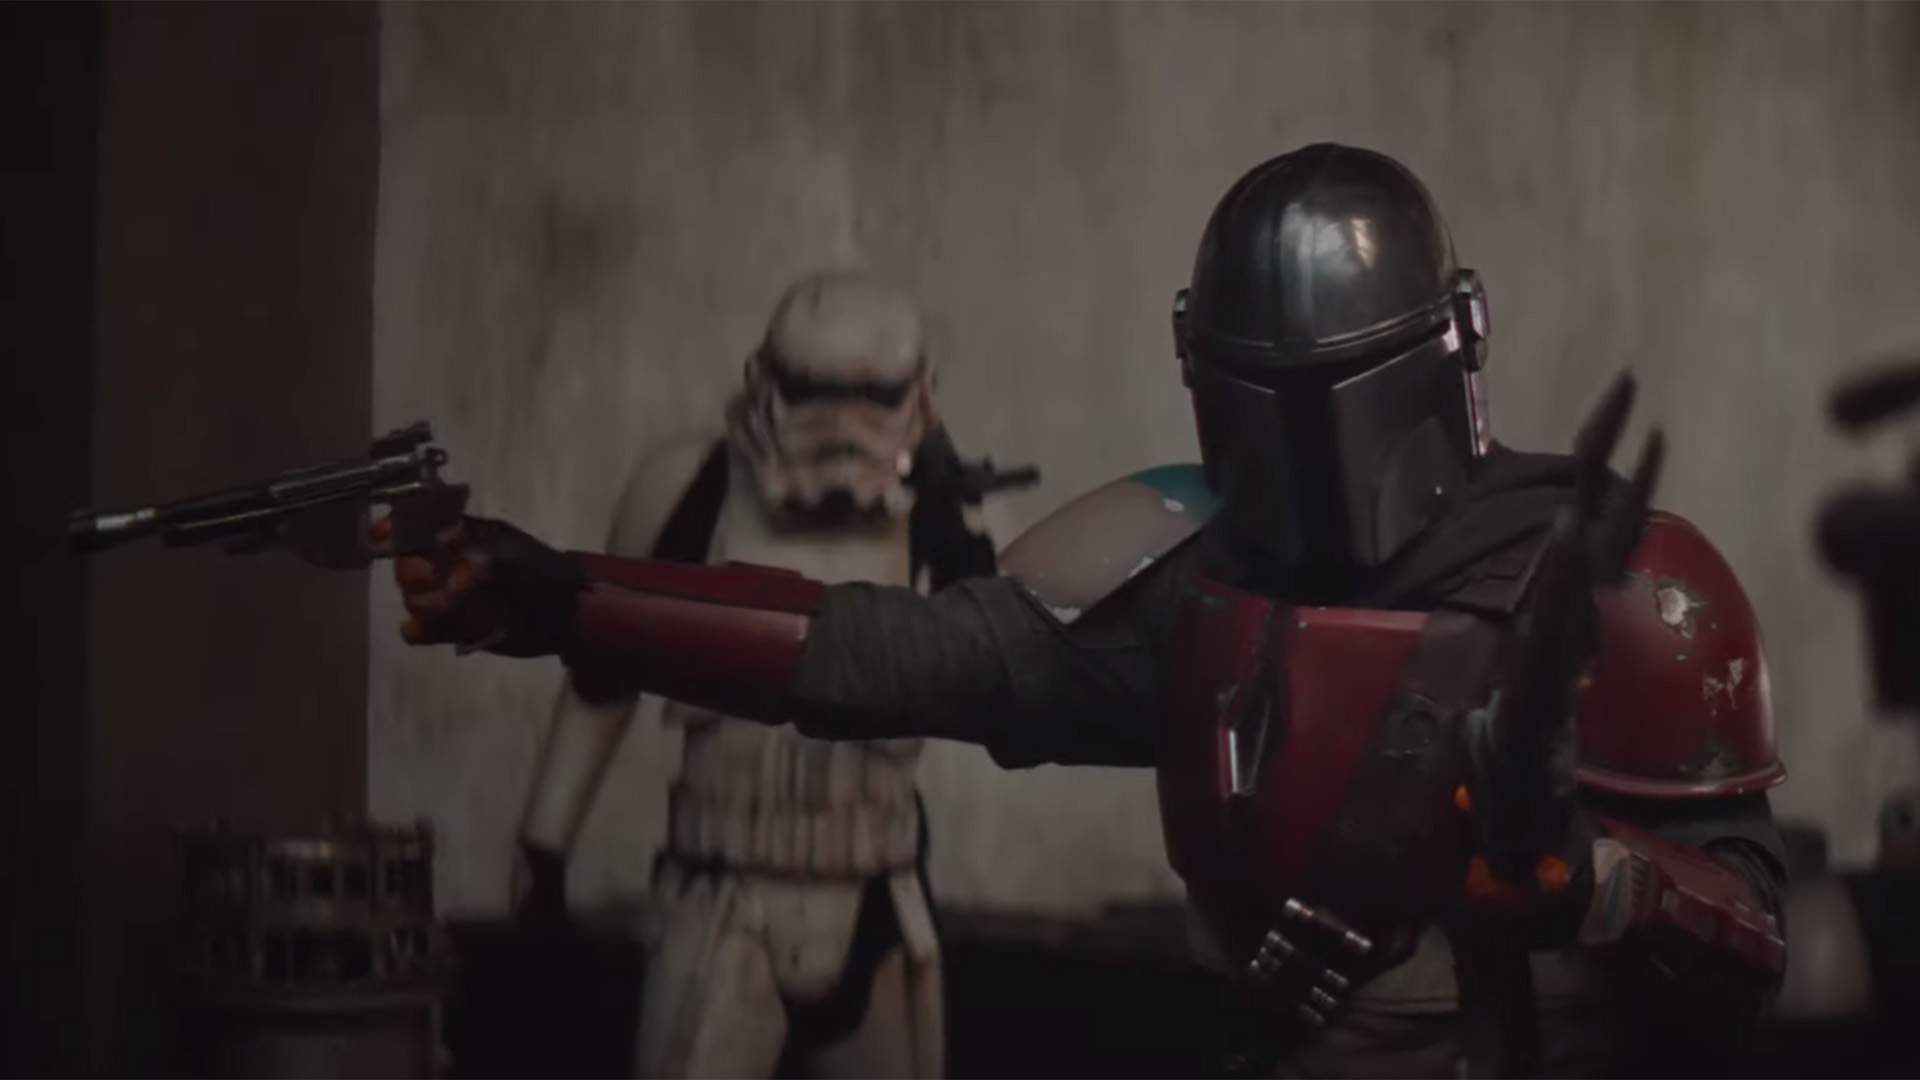 The Thrilling First Trailer for 'Star Wars' Series 'The Mandalorian' Is Here